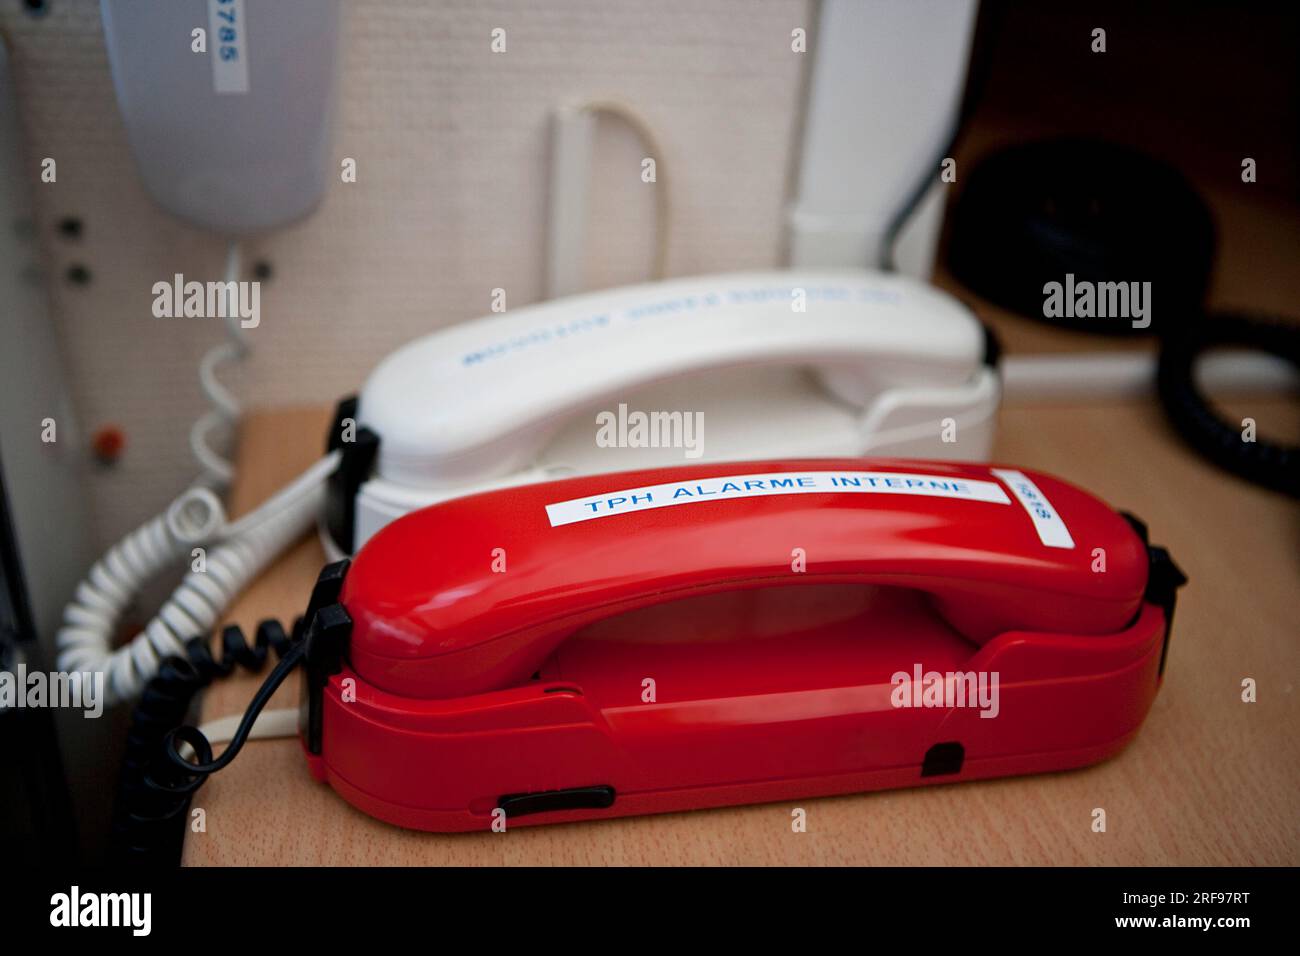 Telephone triggering an alarm in the maternity ward of a hospital. Stock Photo